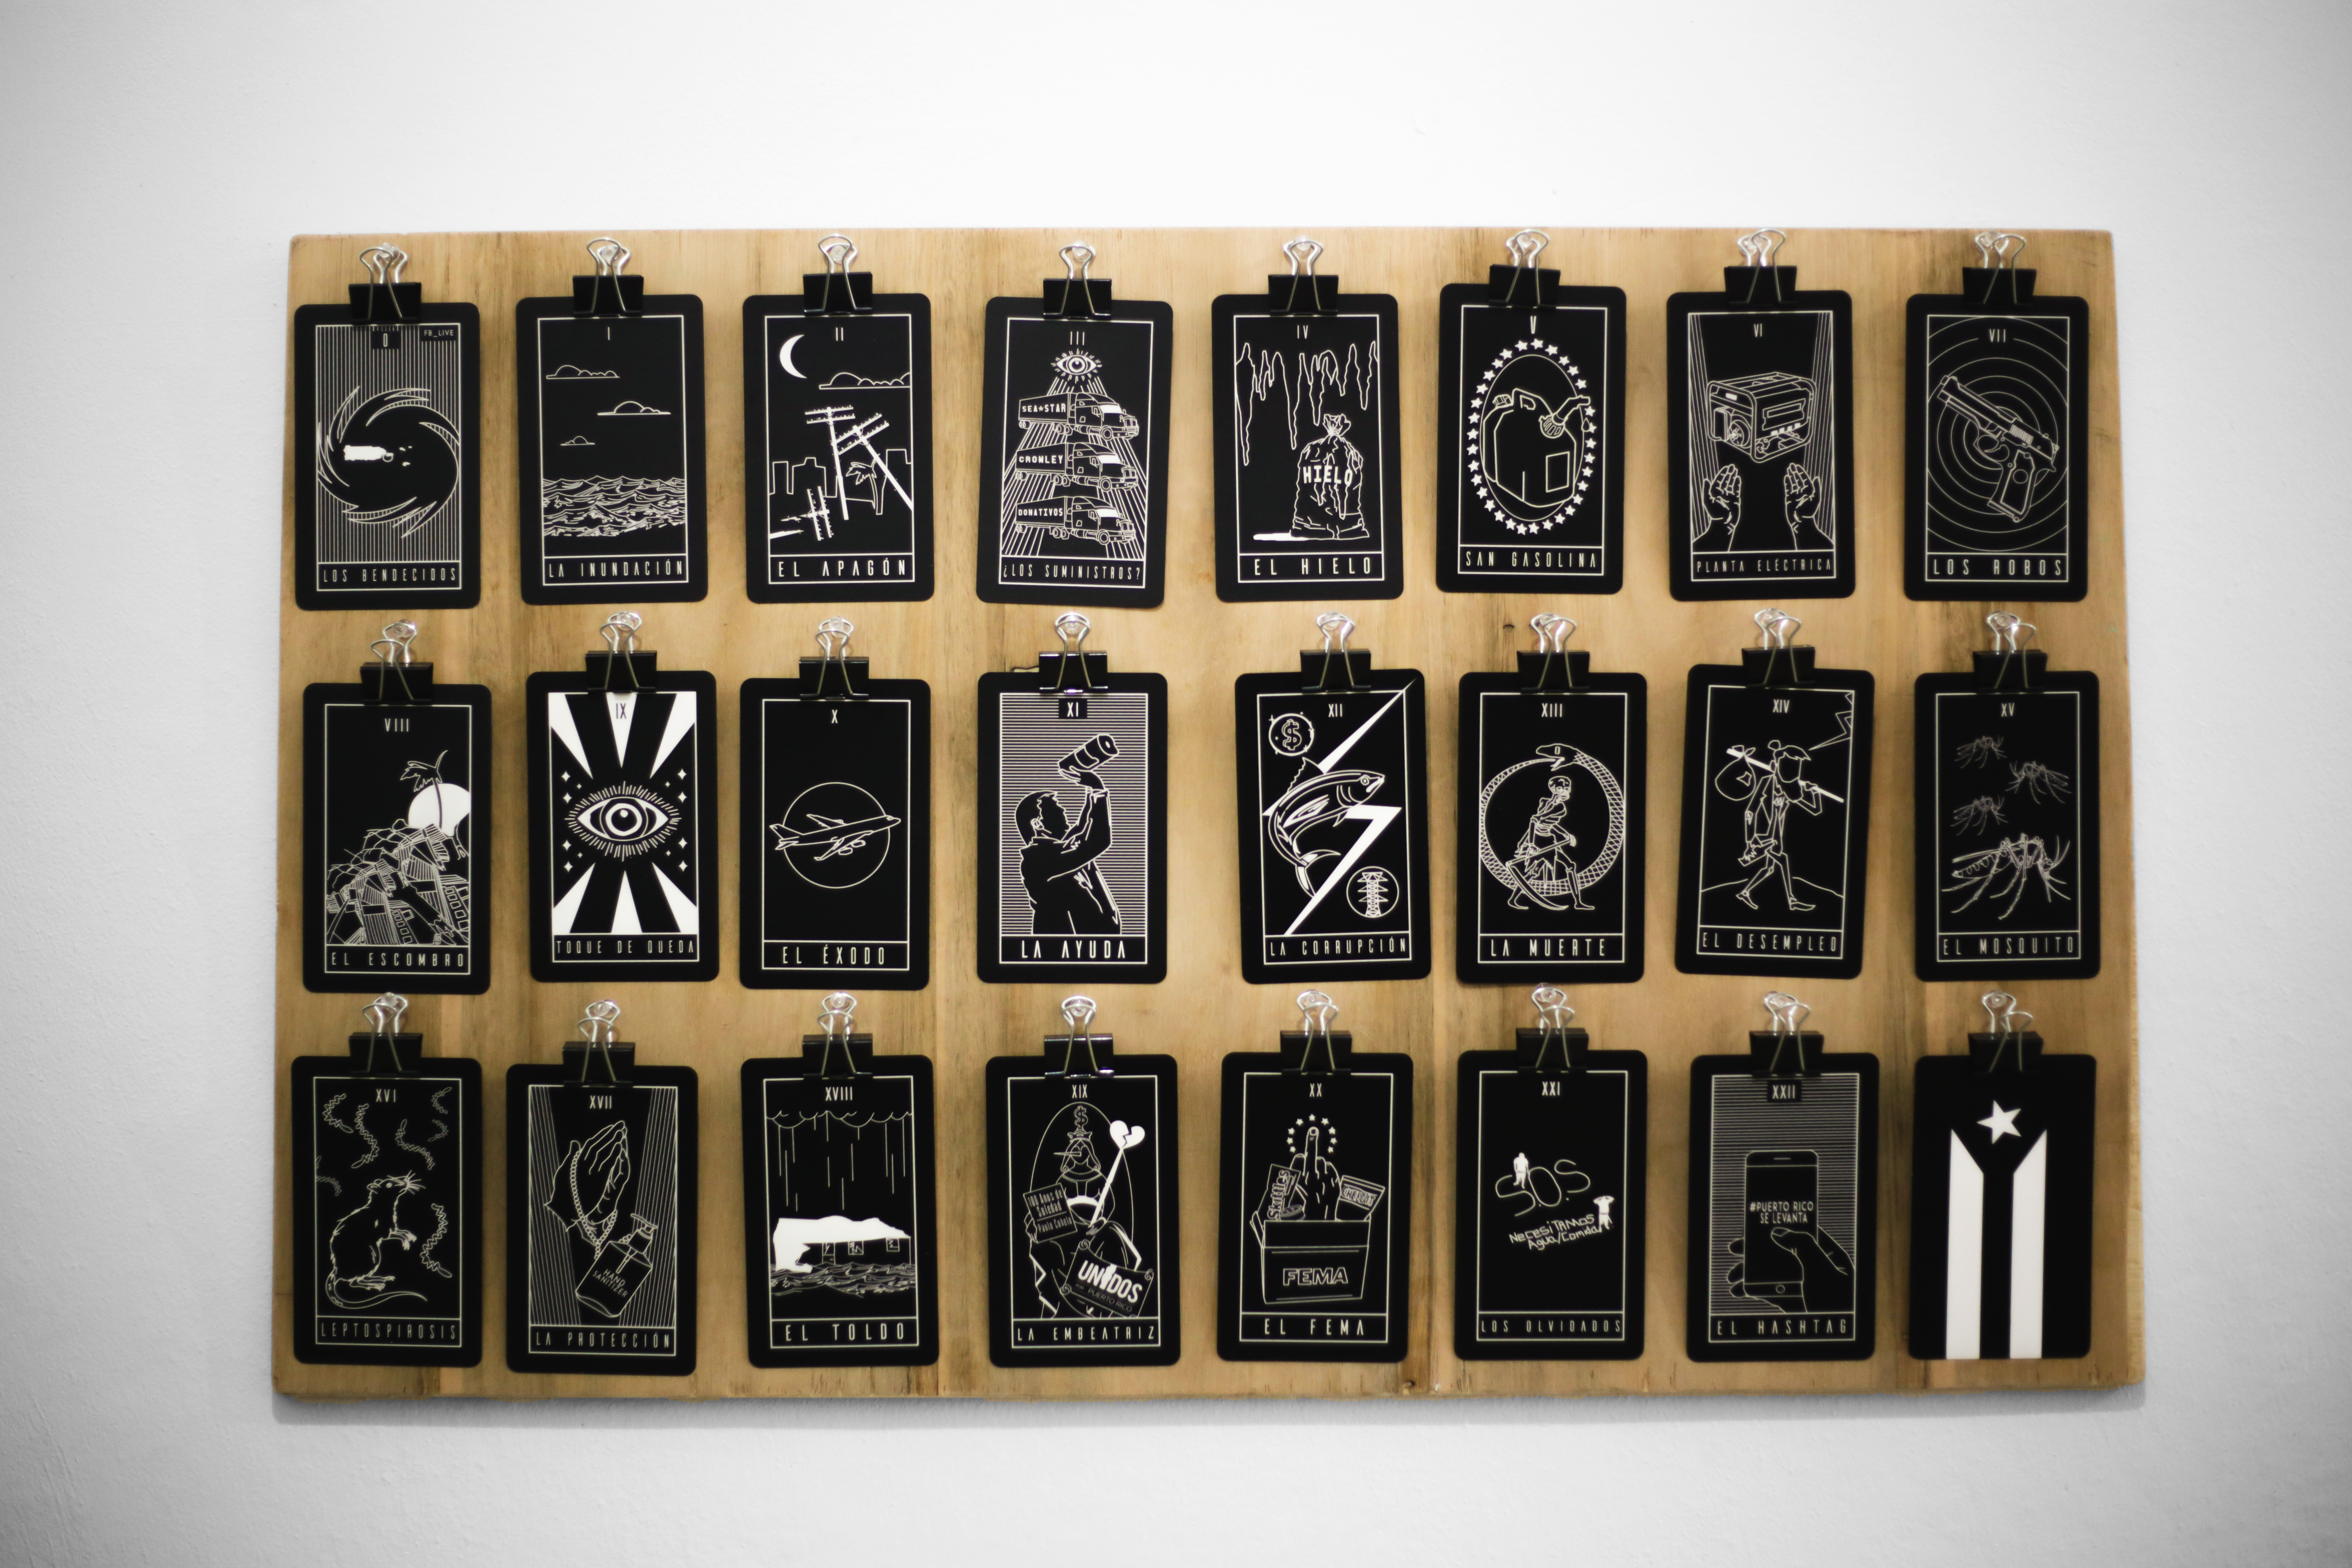 the black-and-white tarot cards trace Hurricane María's narrative while clipped to a wooden board for display